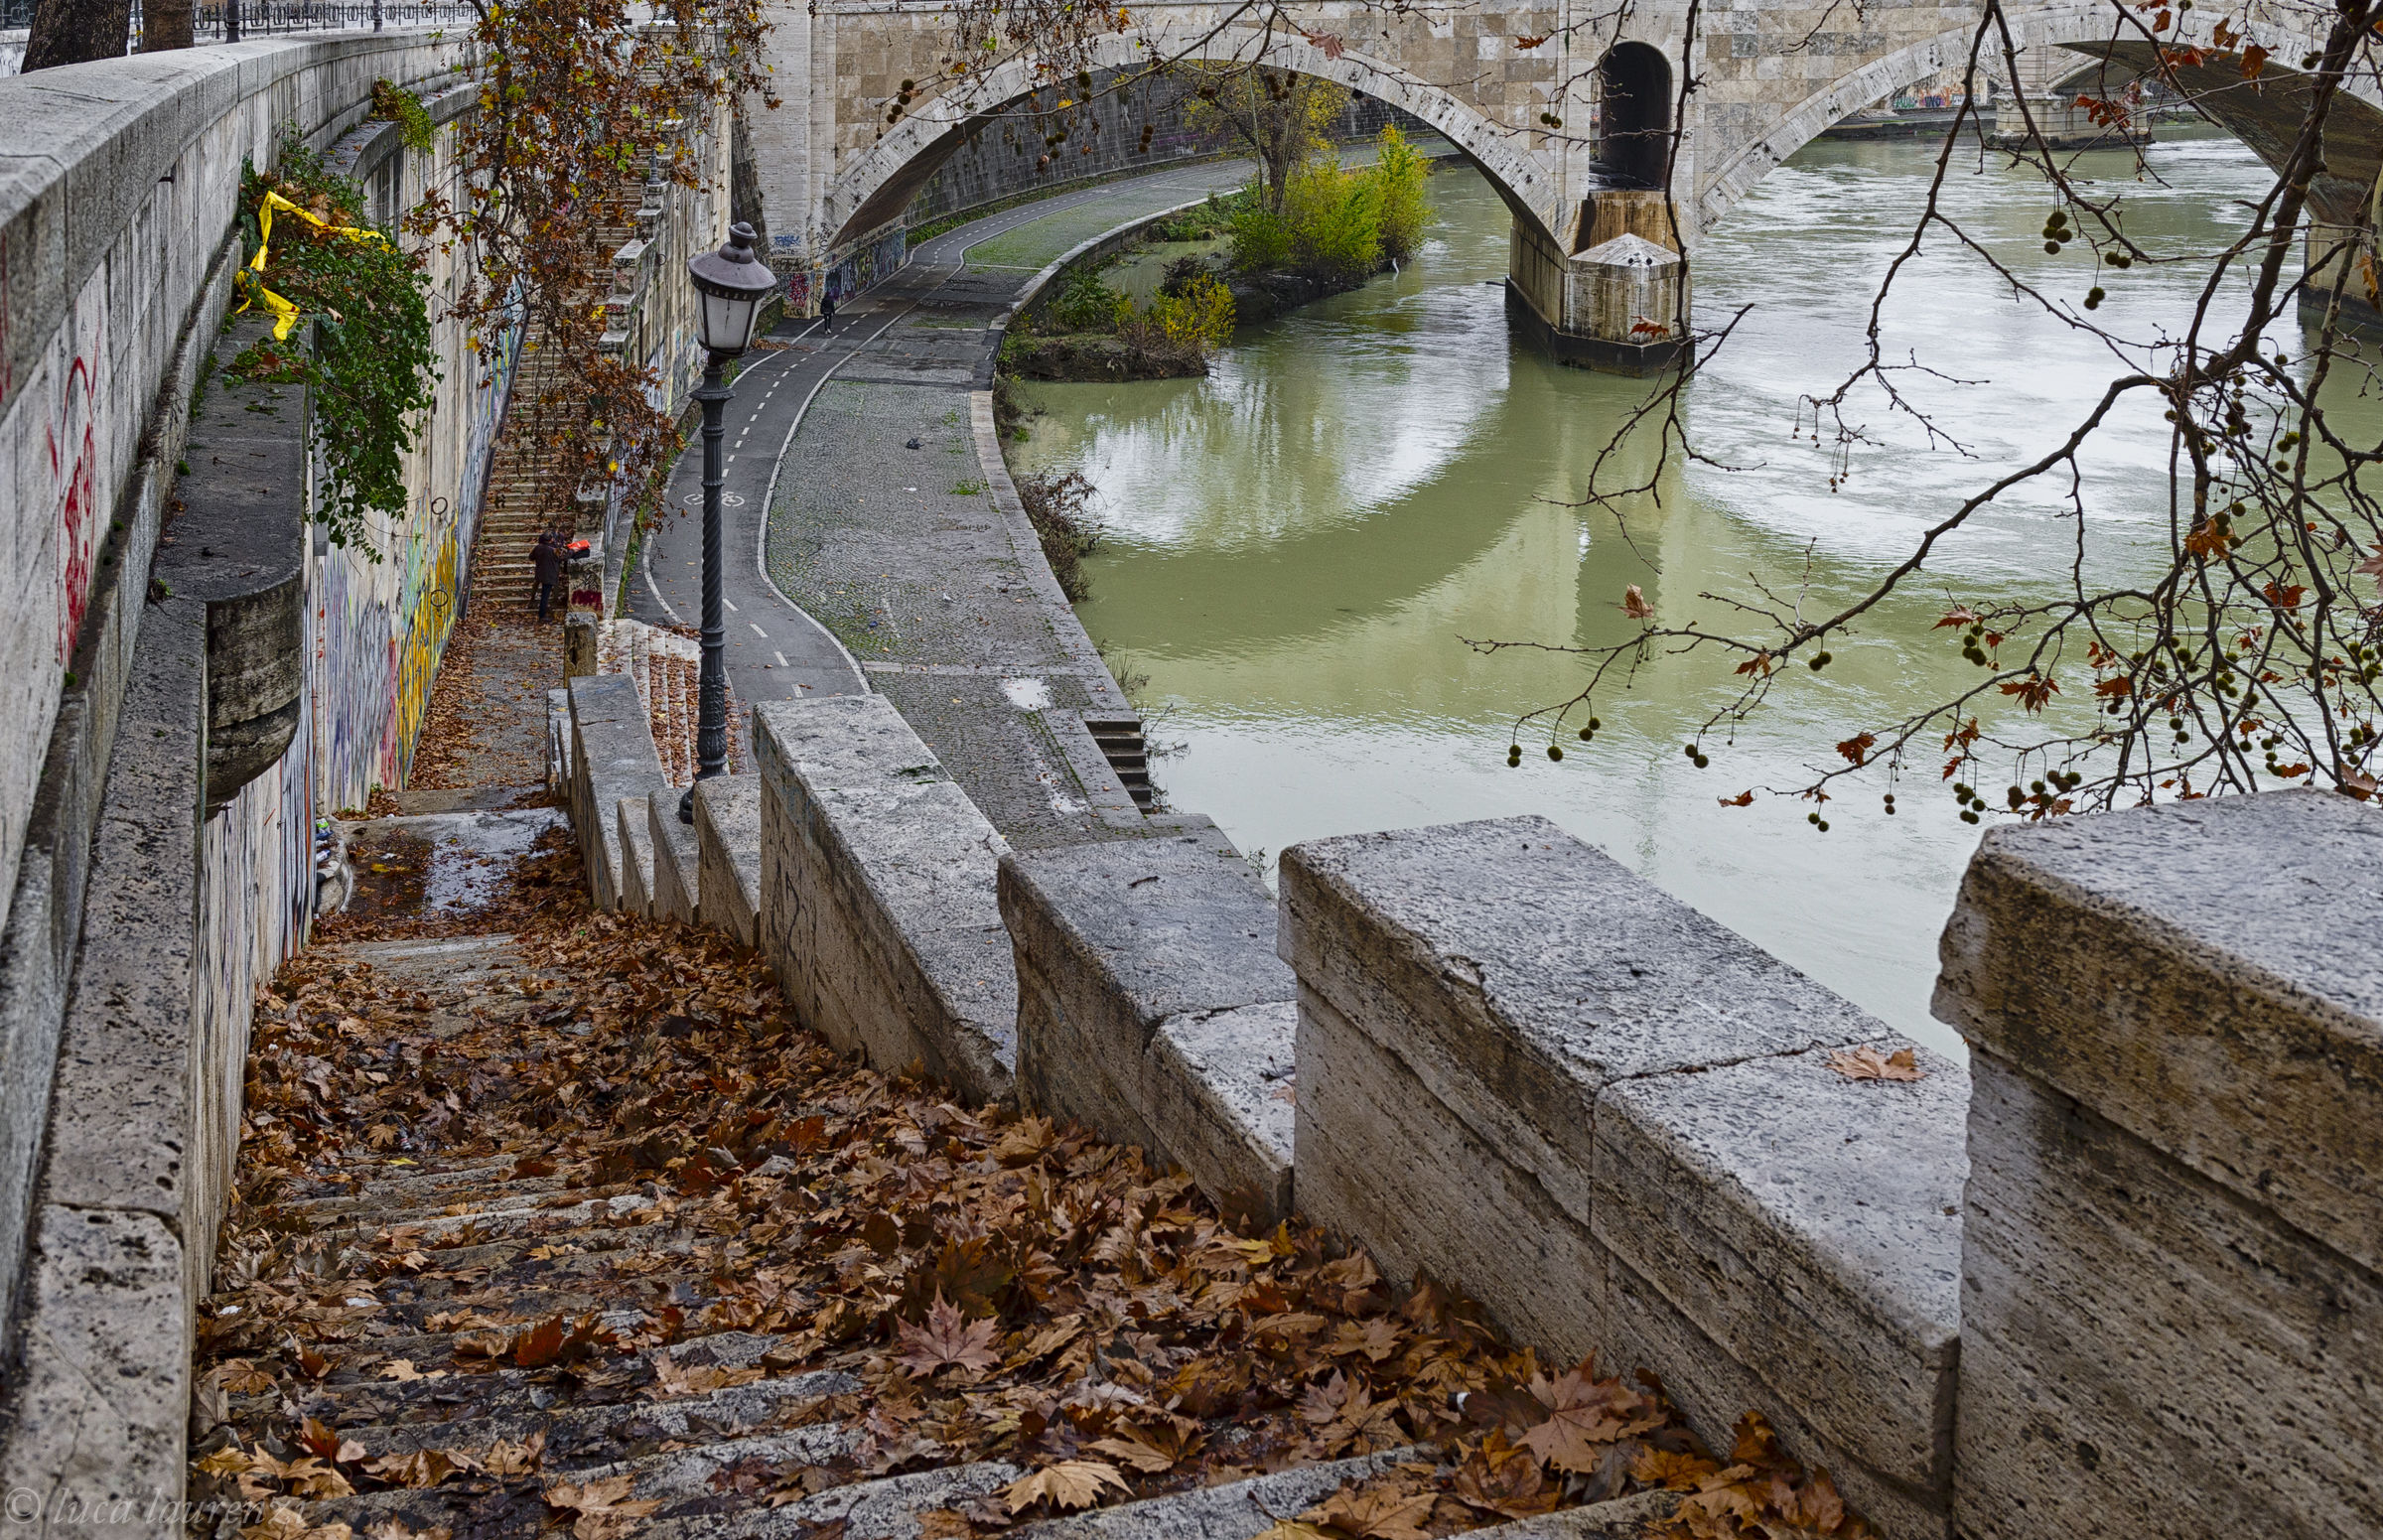 The leaves fall on the long tiber...